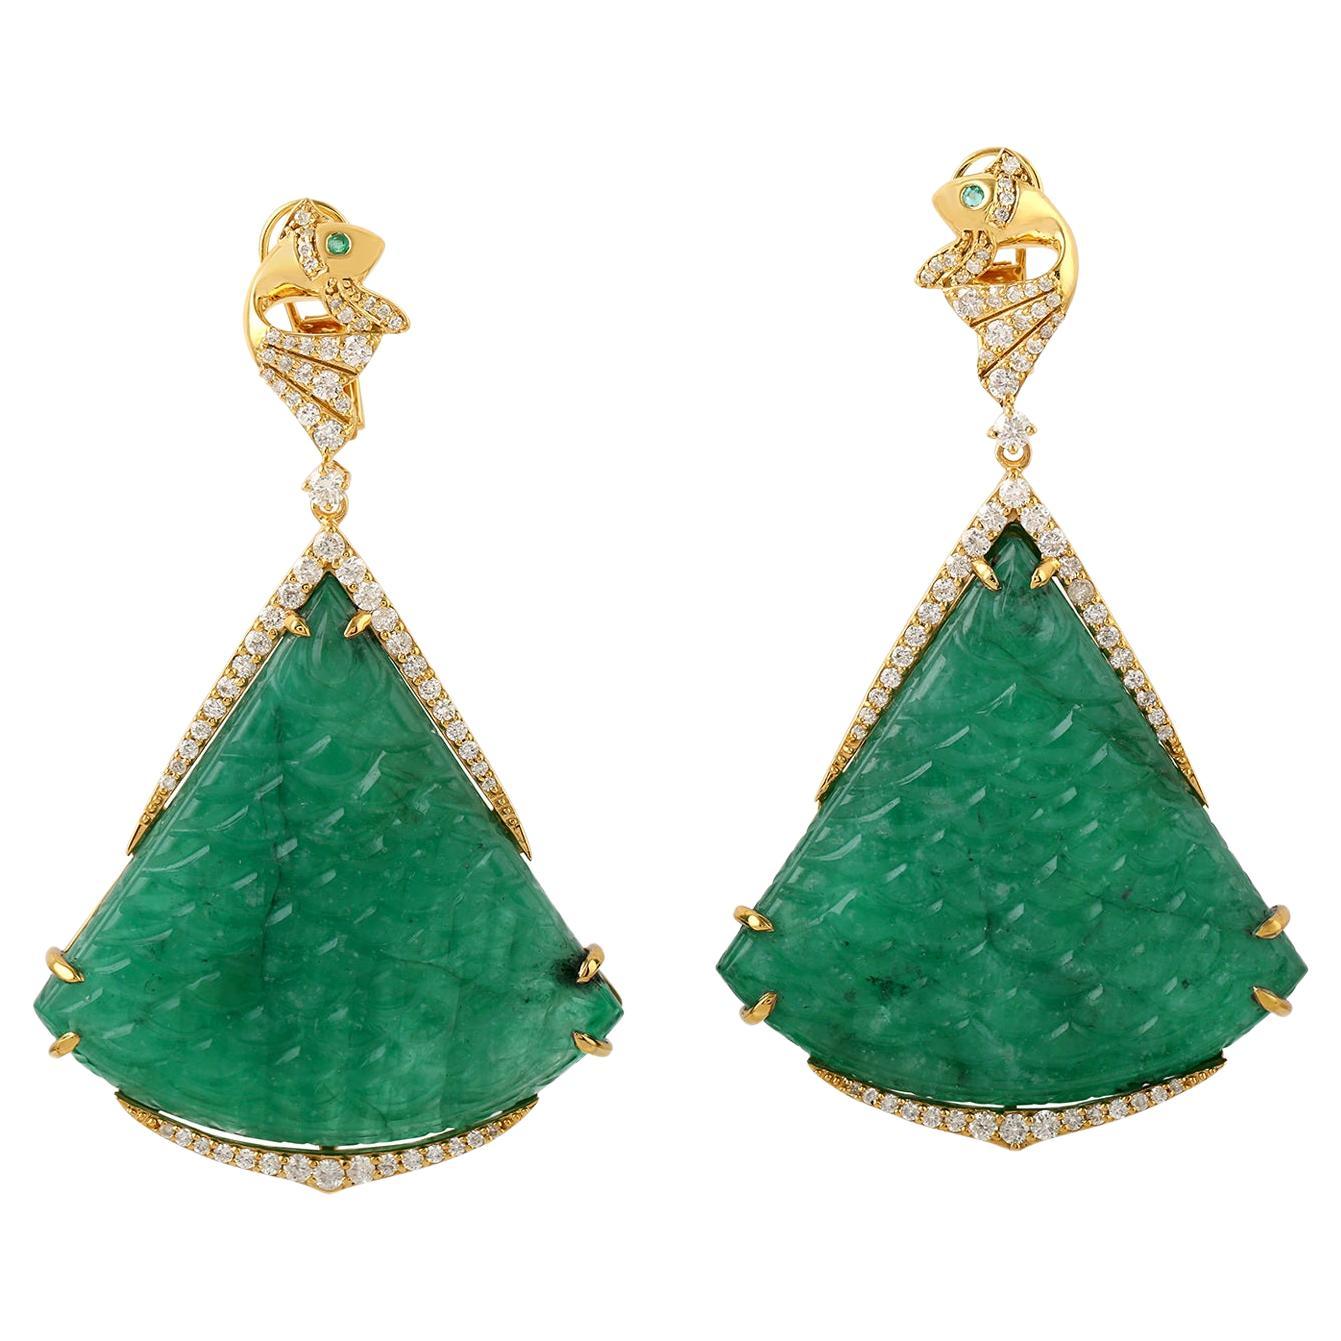 106.99ct Anchor Resembling Shaped Emerald Dangle Earrings With Diamonds